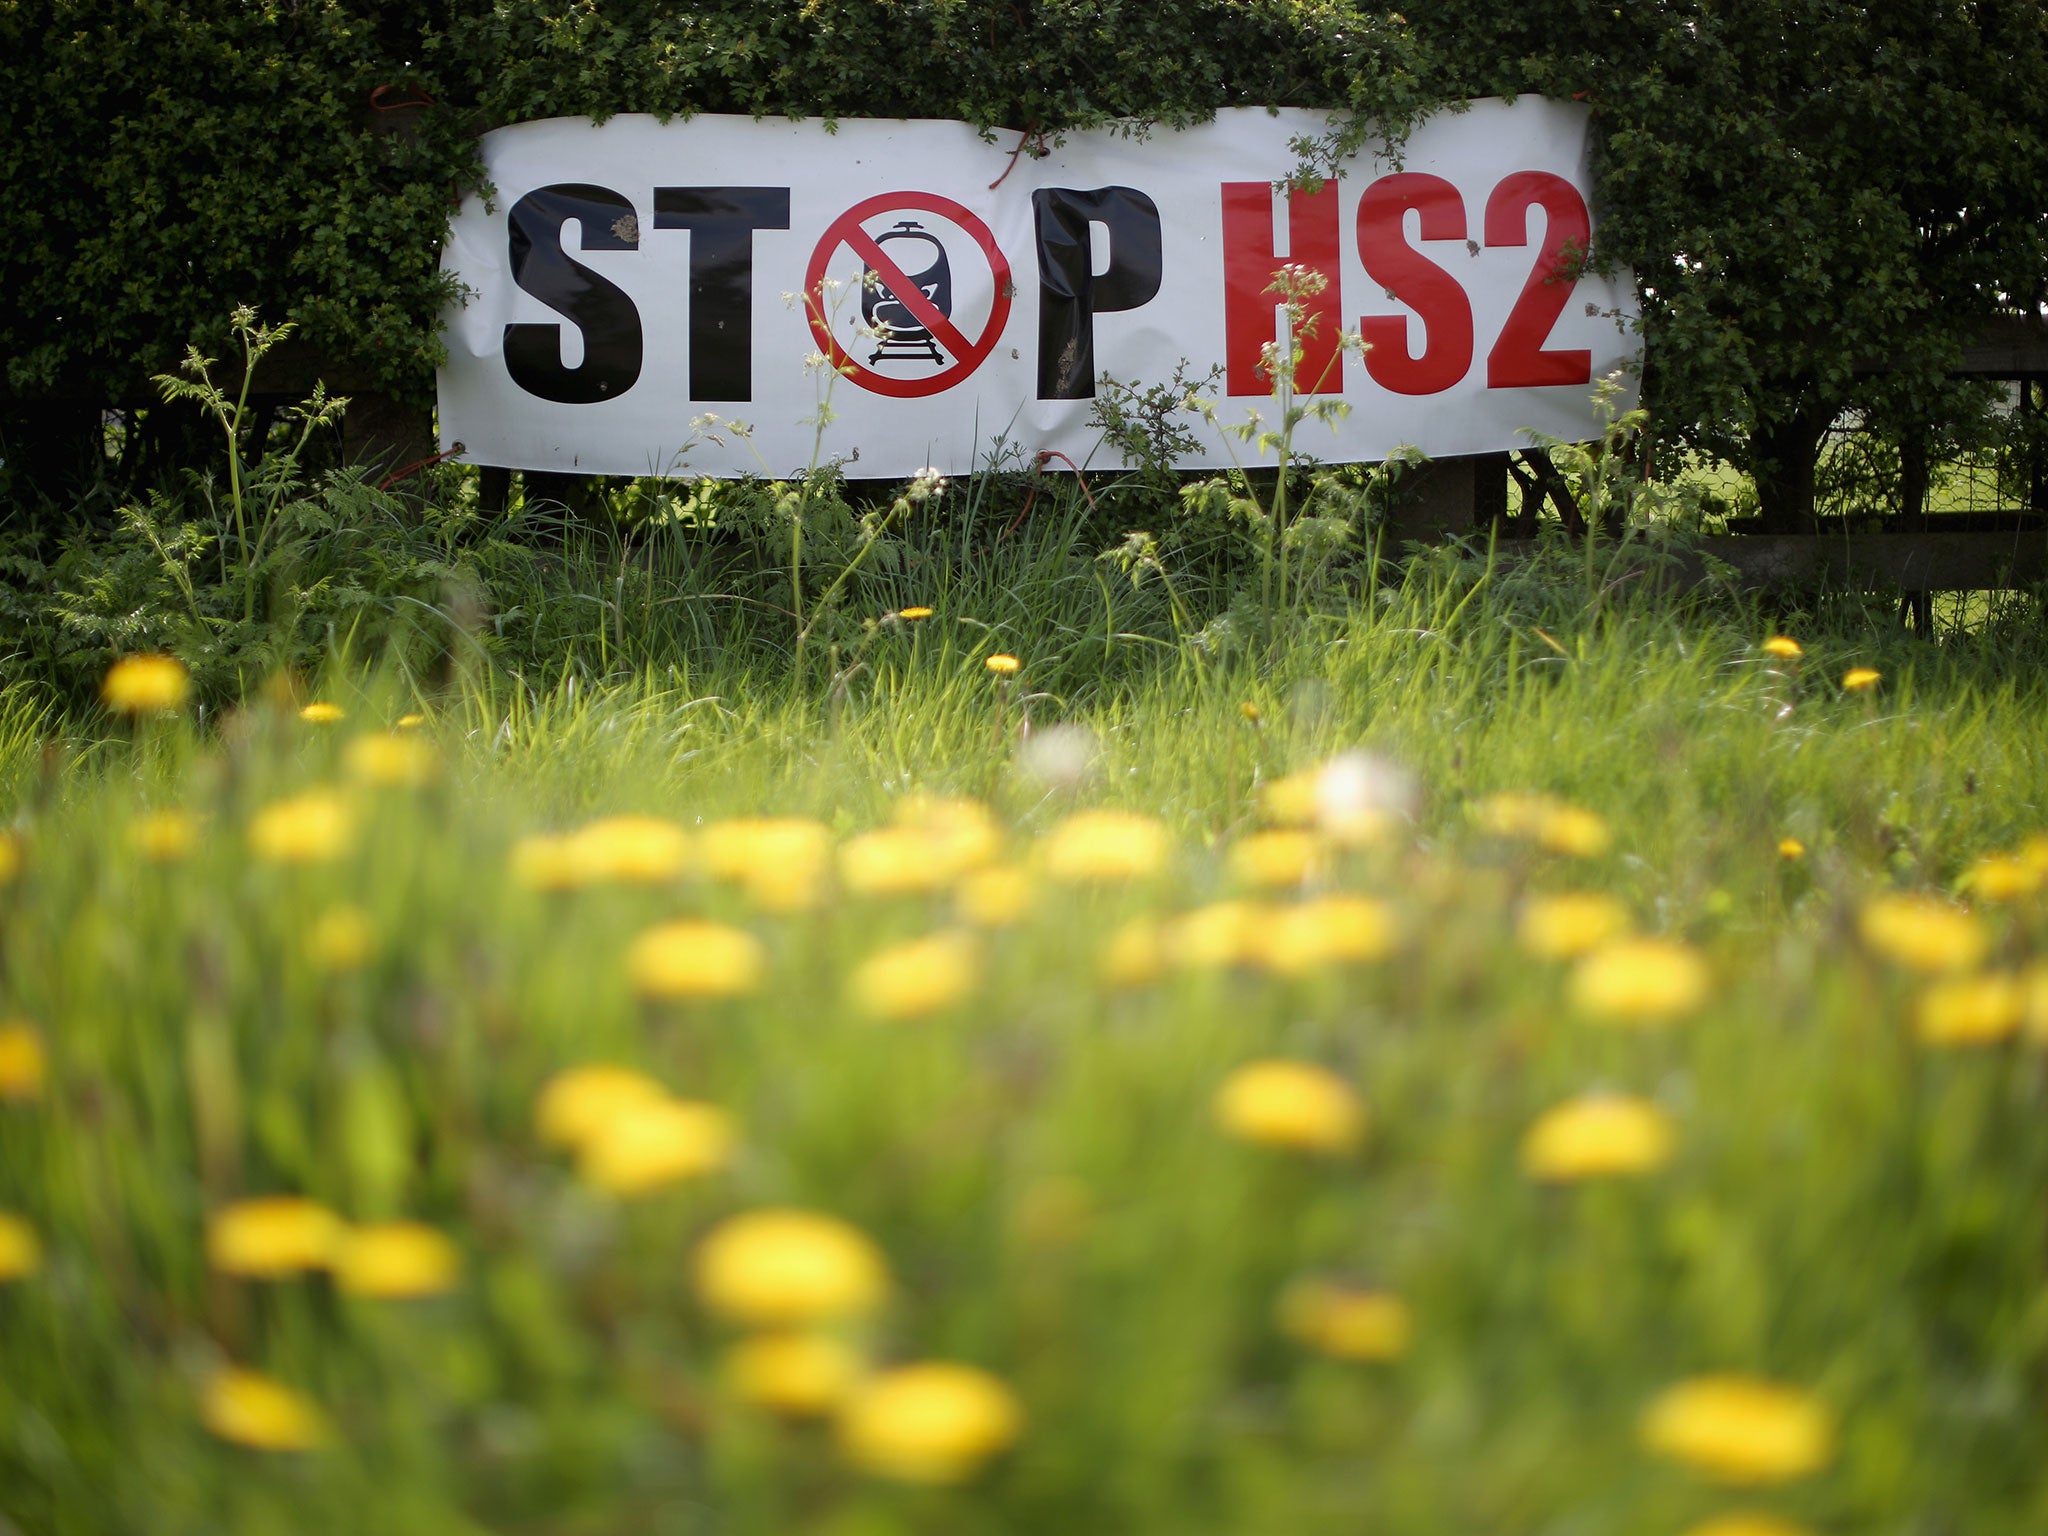 Stop HS2 posters mark the point where the proposed route of the new HS2 high speed rail link will pass through near to the village of Warburton